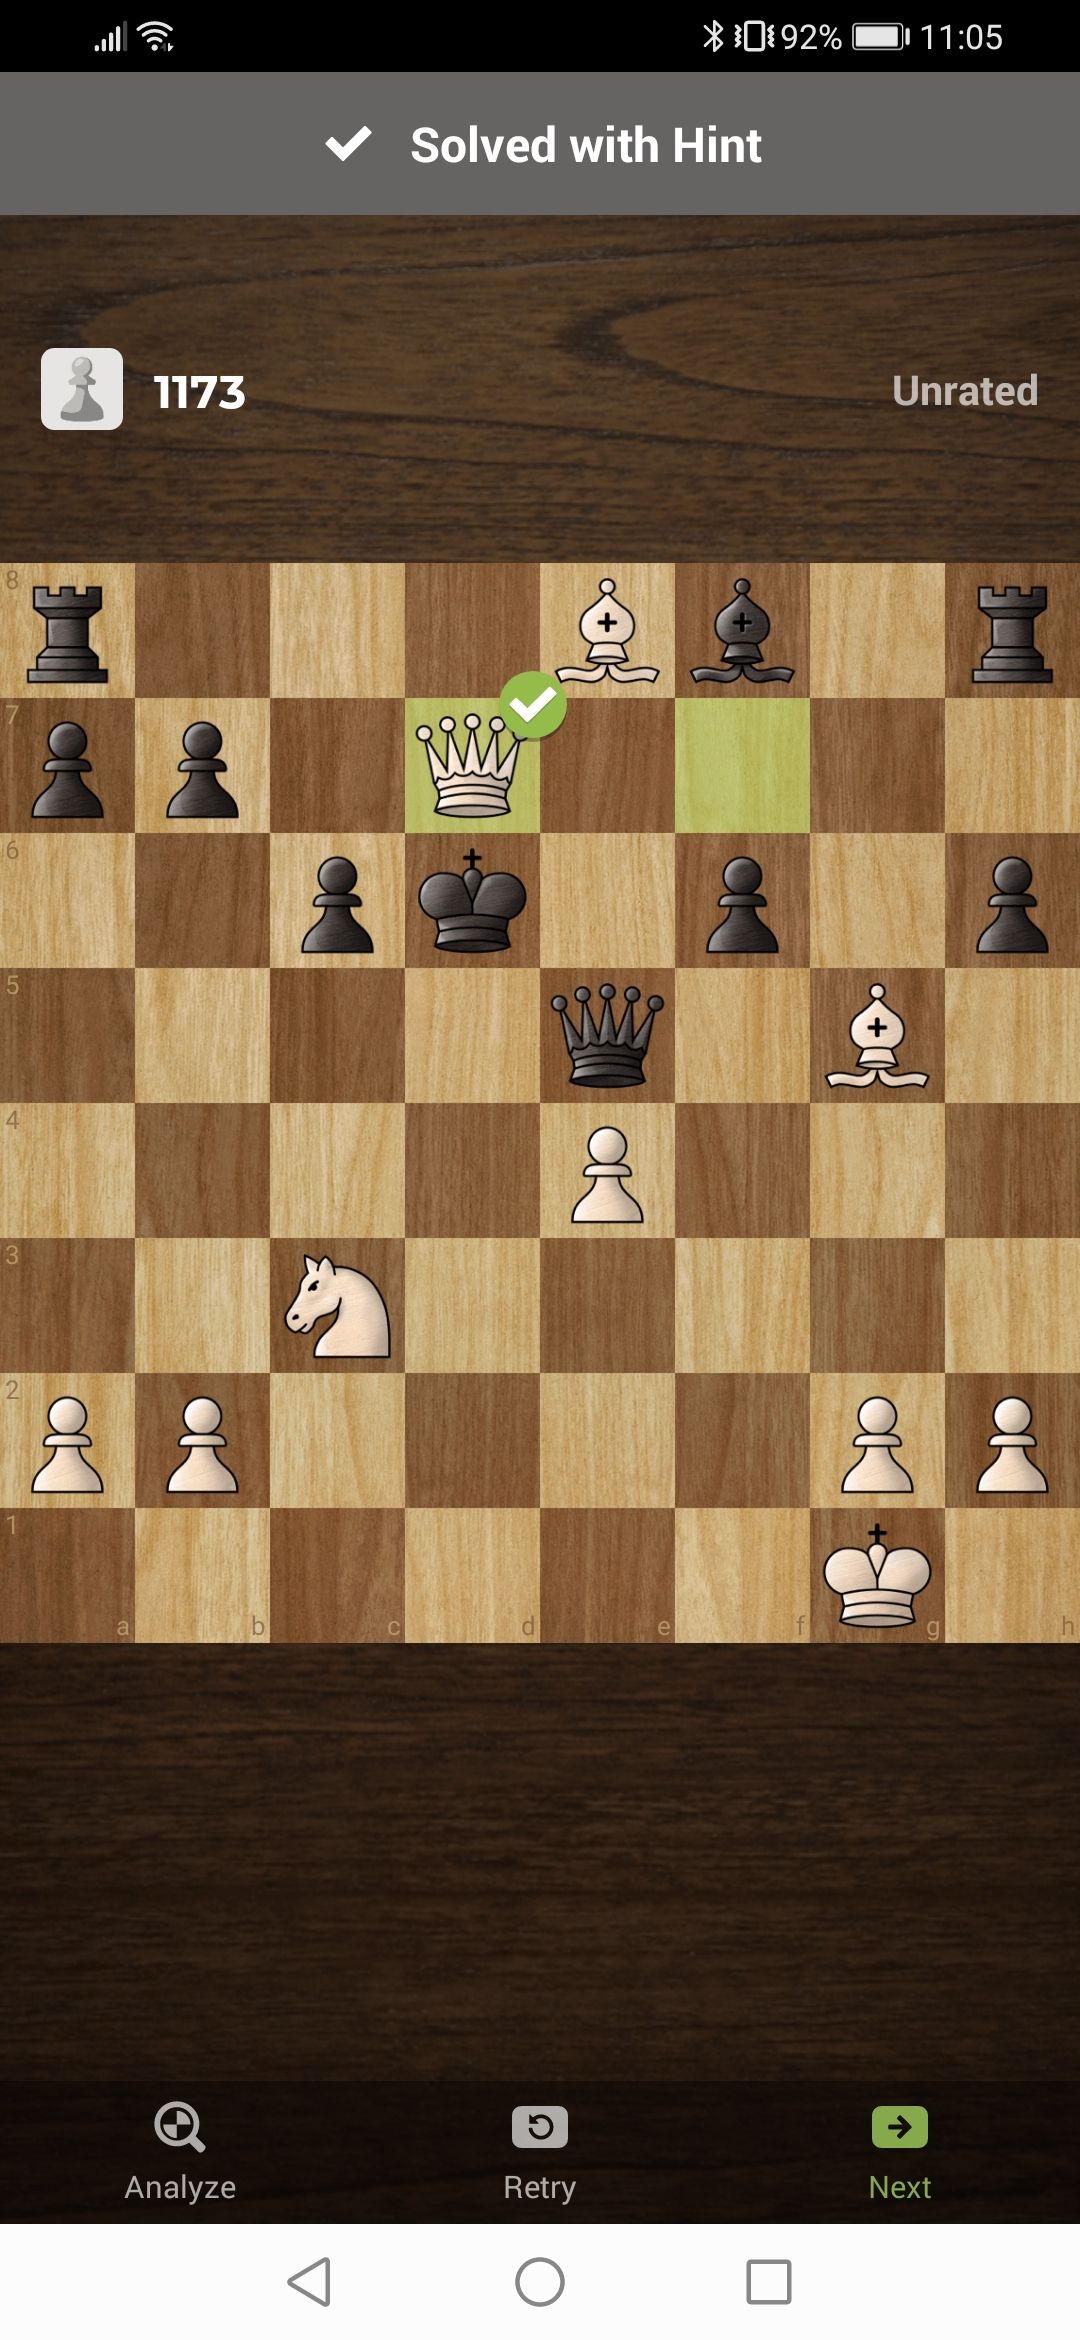 checkmate in 1 puzzle - Chess Forums 